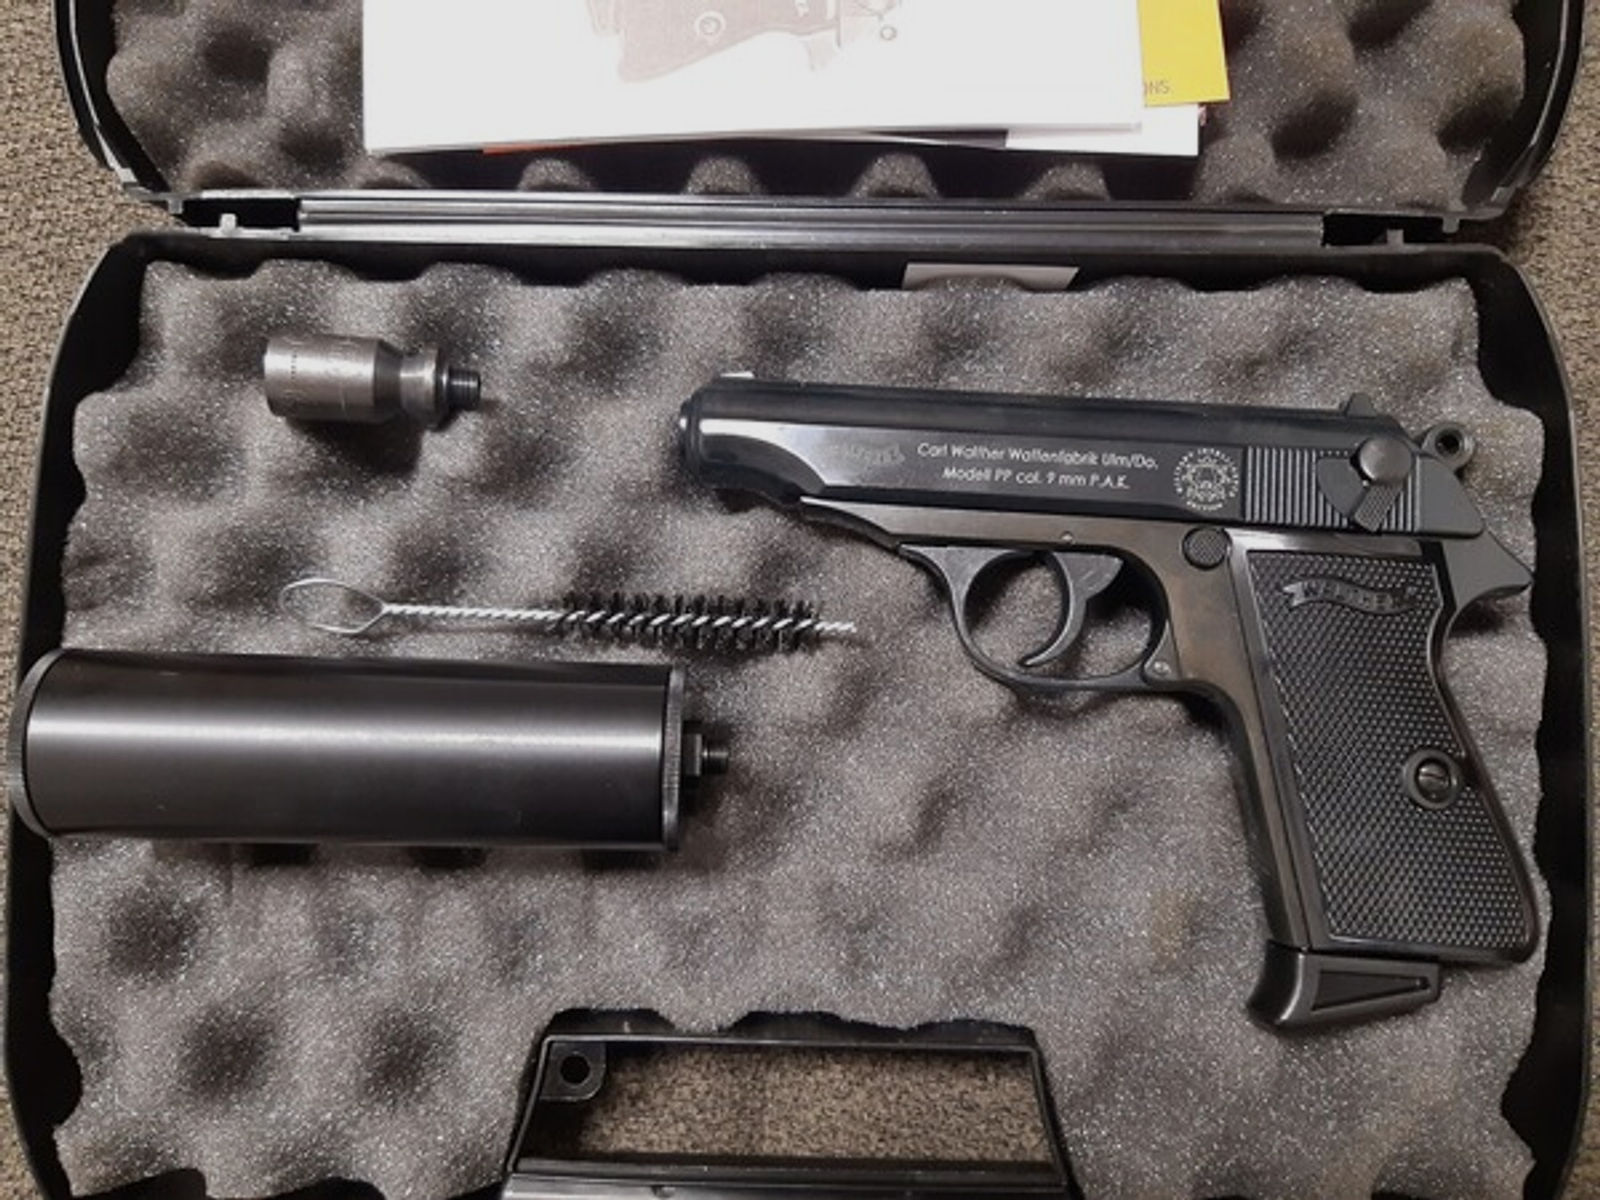 Tramm & Hinners  Walther PP cal. 9 mm P.A.K. - Schwarz